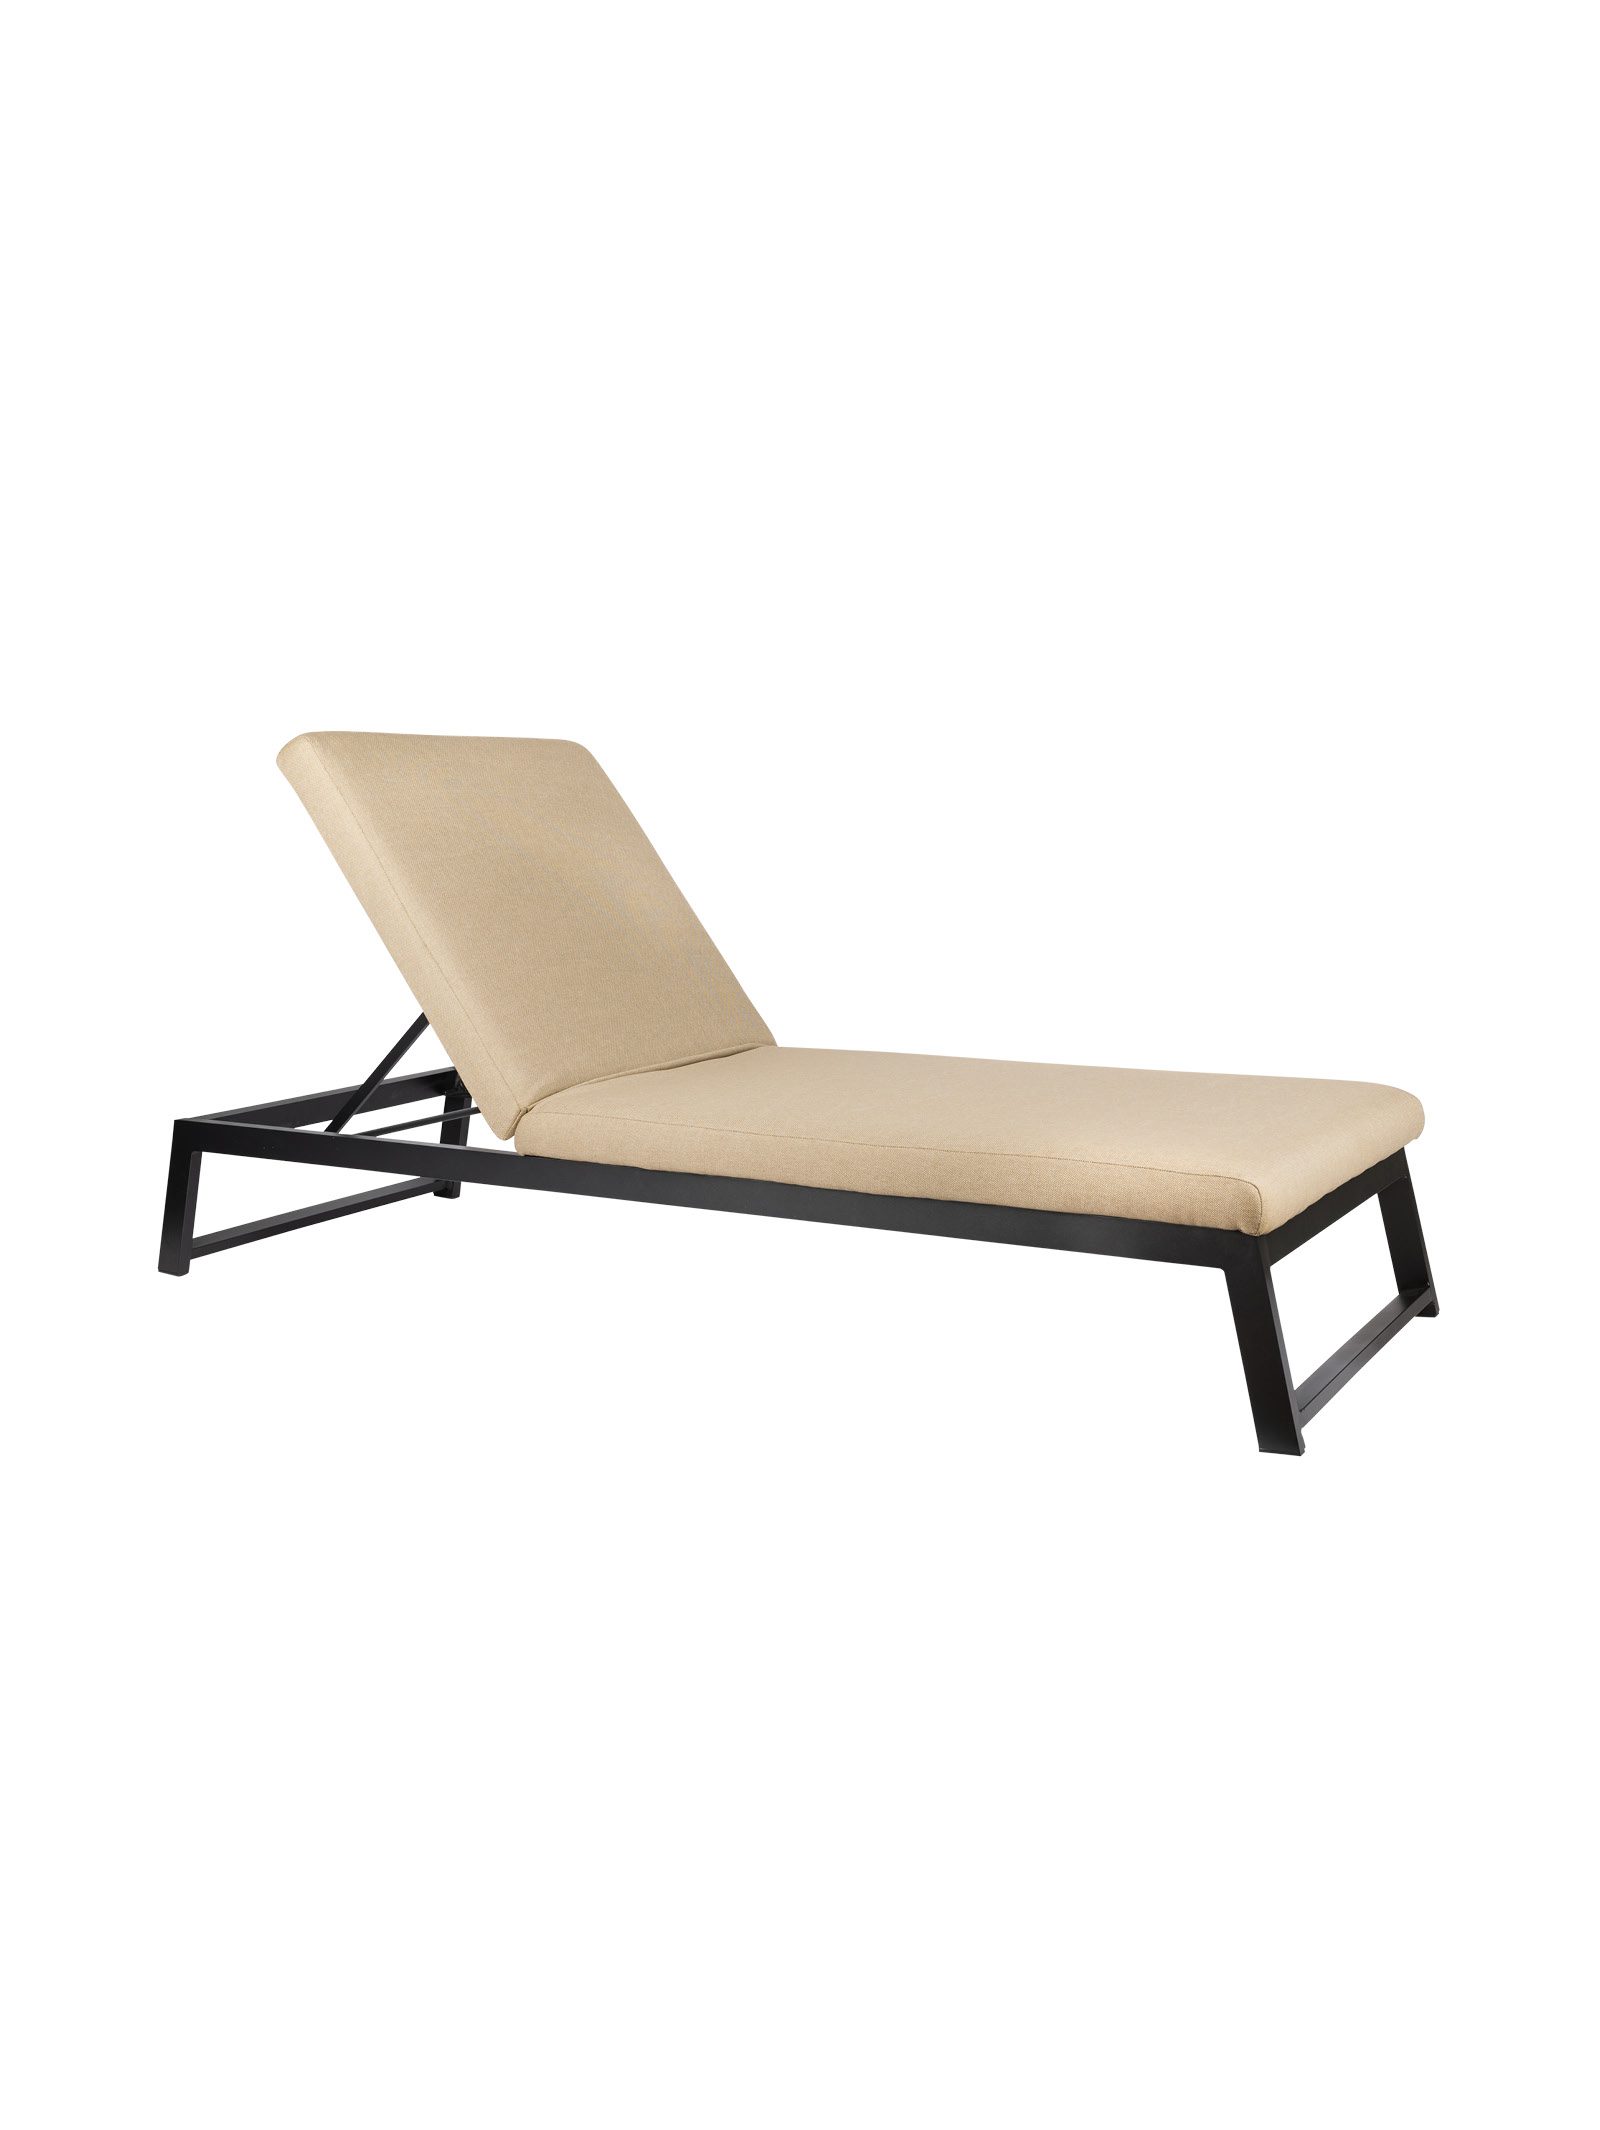 Tangier Outdoor Lounger in Driftwood